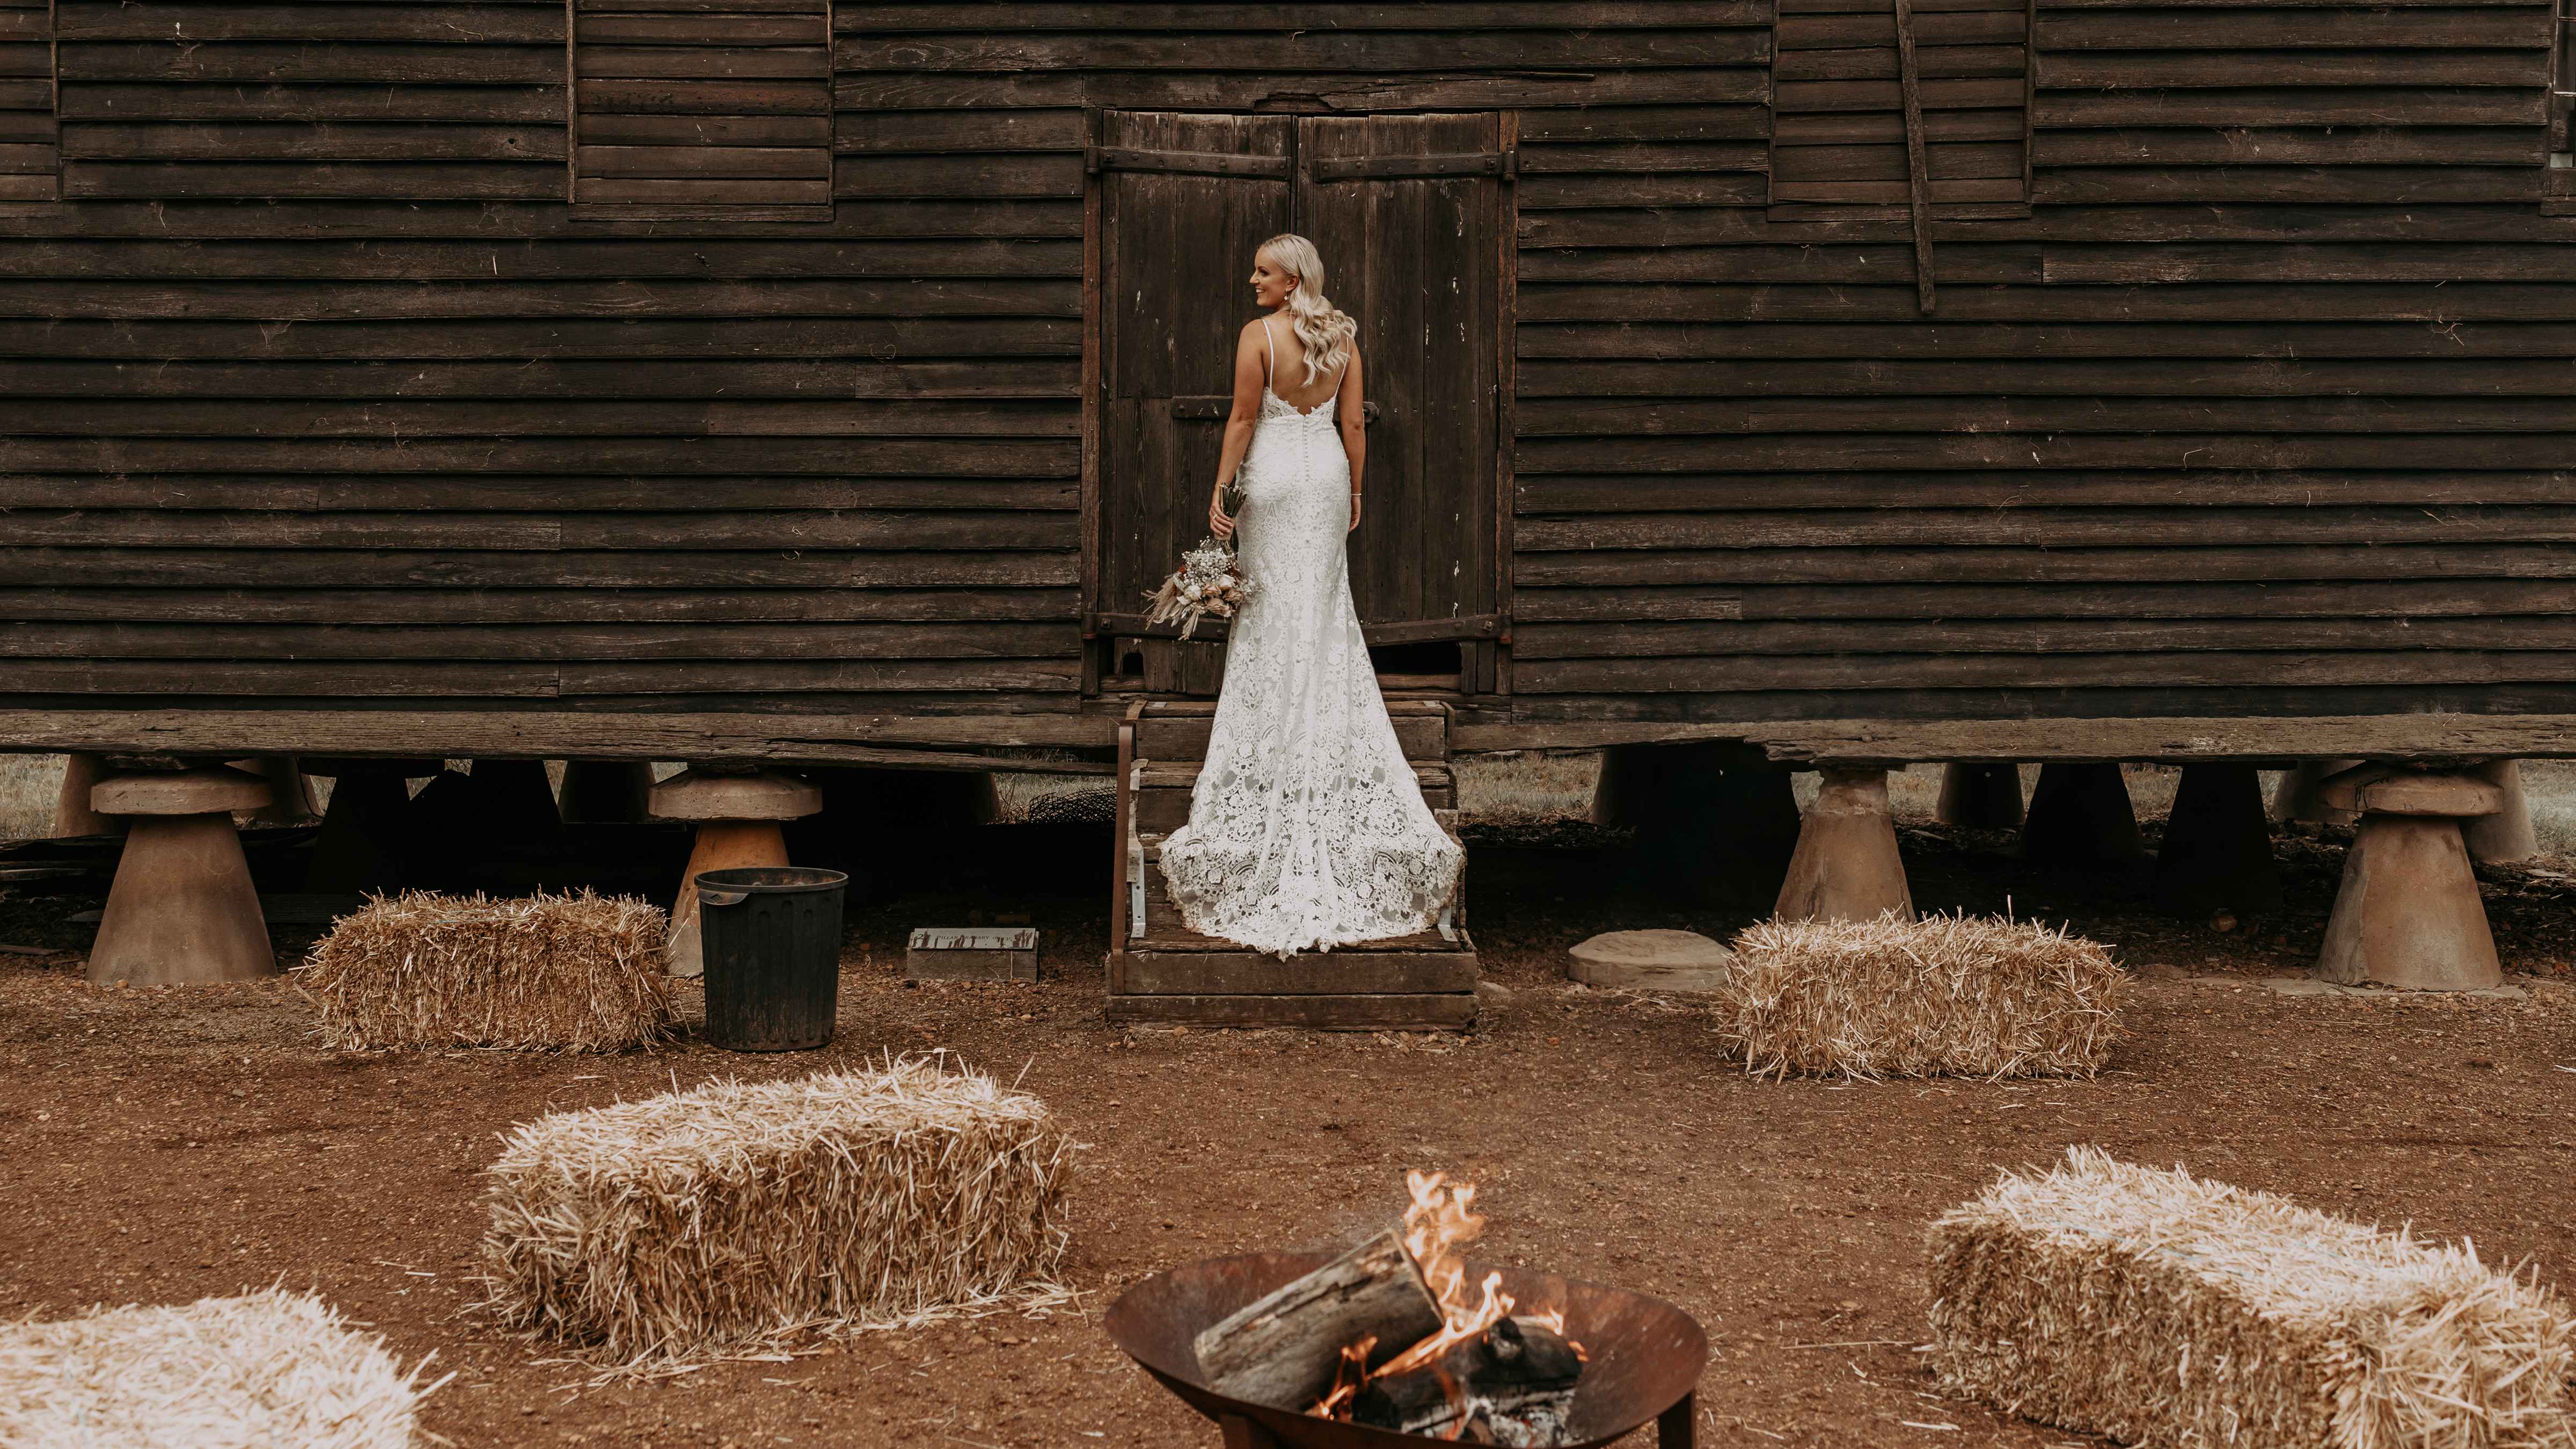 A bride in a wedding dress stands on the steps of the timber Pillar Granary. Hay bales are placed on the gravel below as well as a lit fire pit. Photo: Tiarne Shaw Photography.